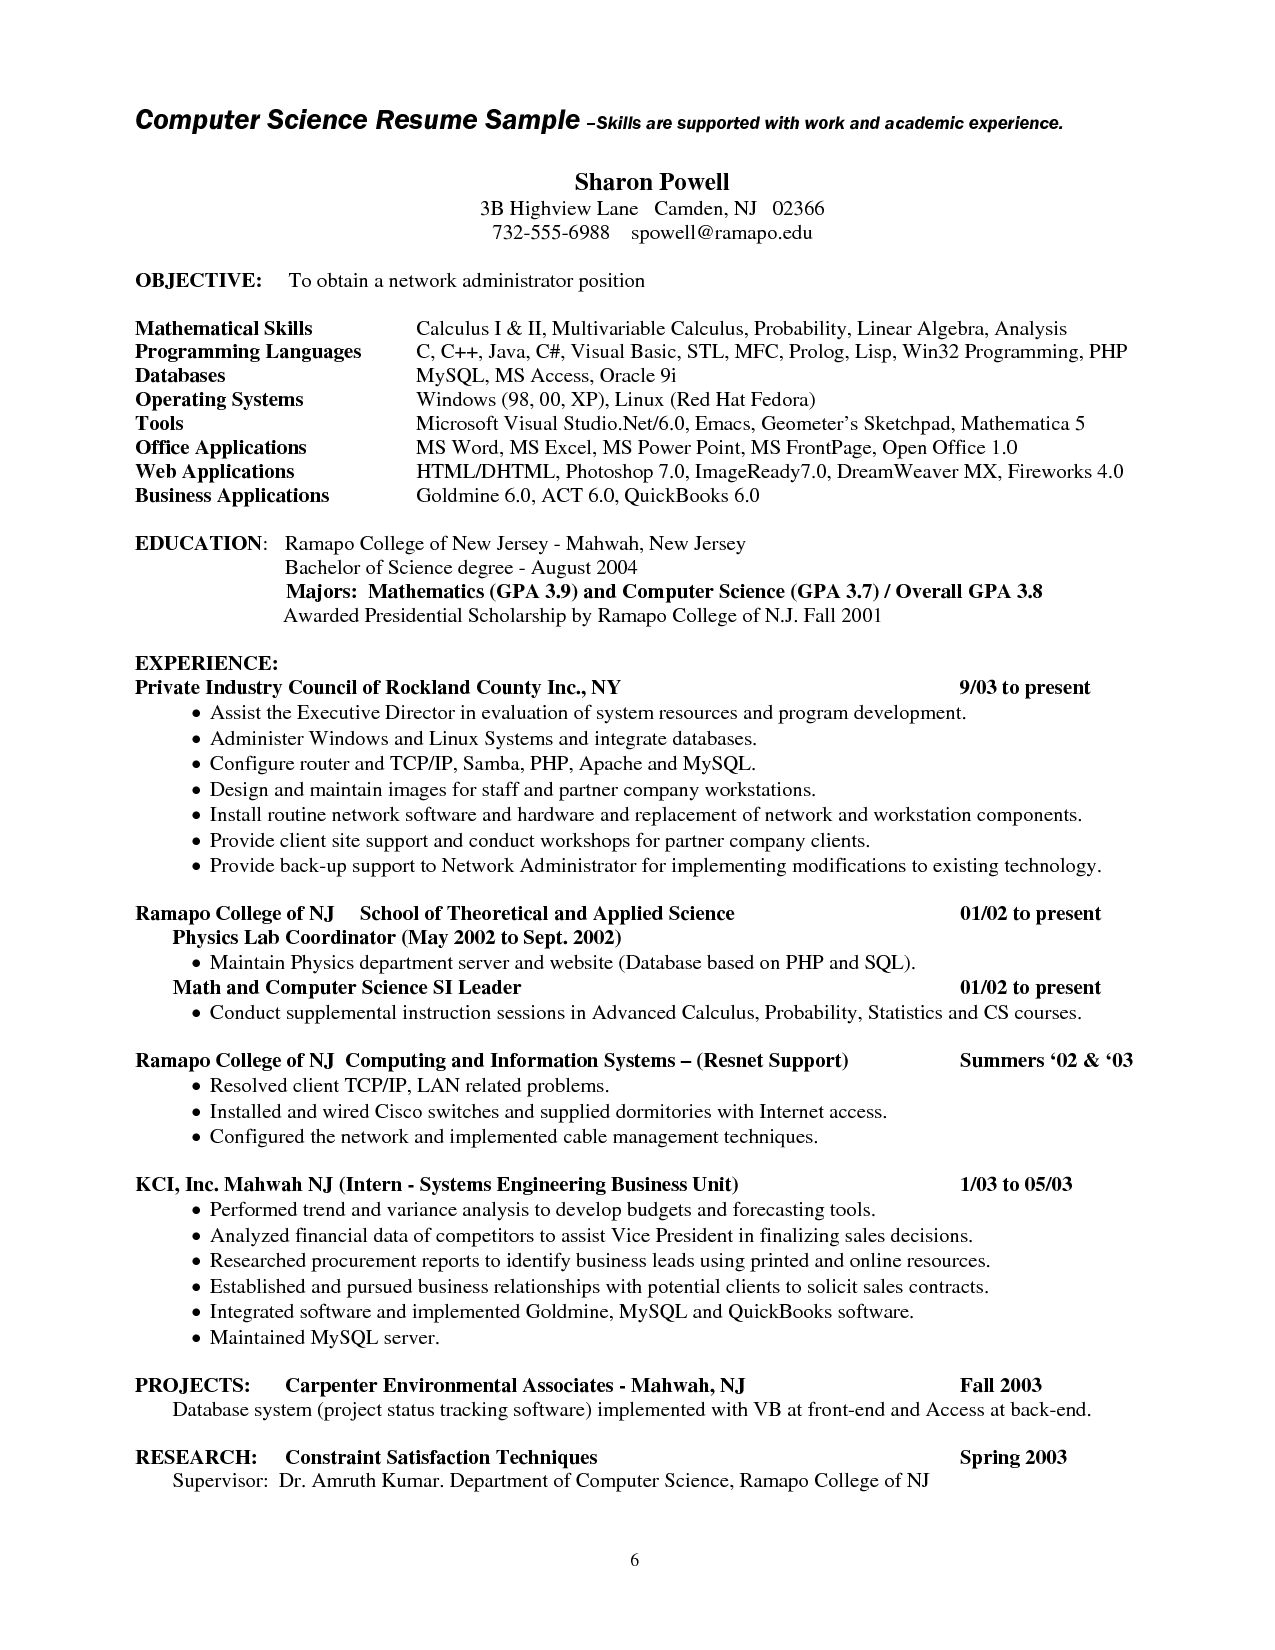 Cv Template Computer Science Resume Skills Resume throughout dimensions 1275 X 1650